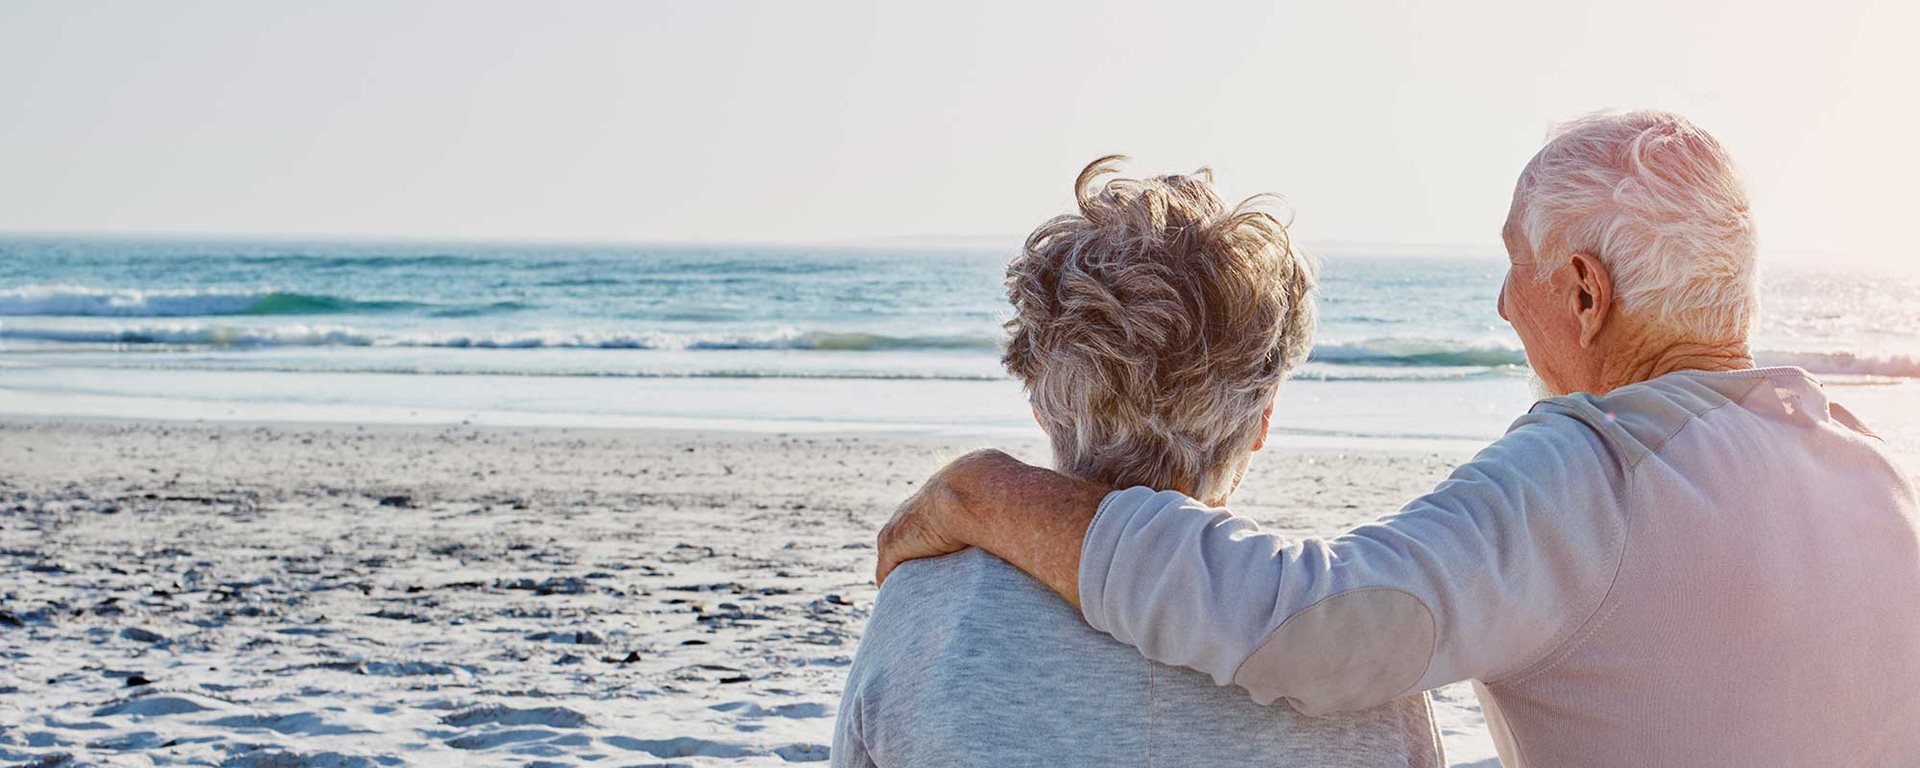 Old couple standing on beach looking toward the ocean